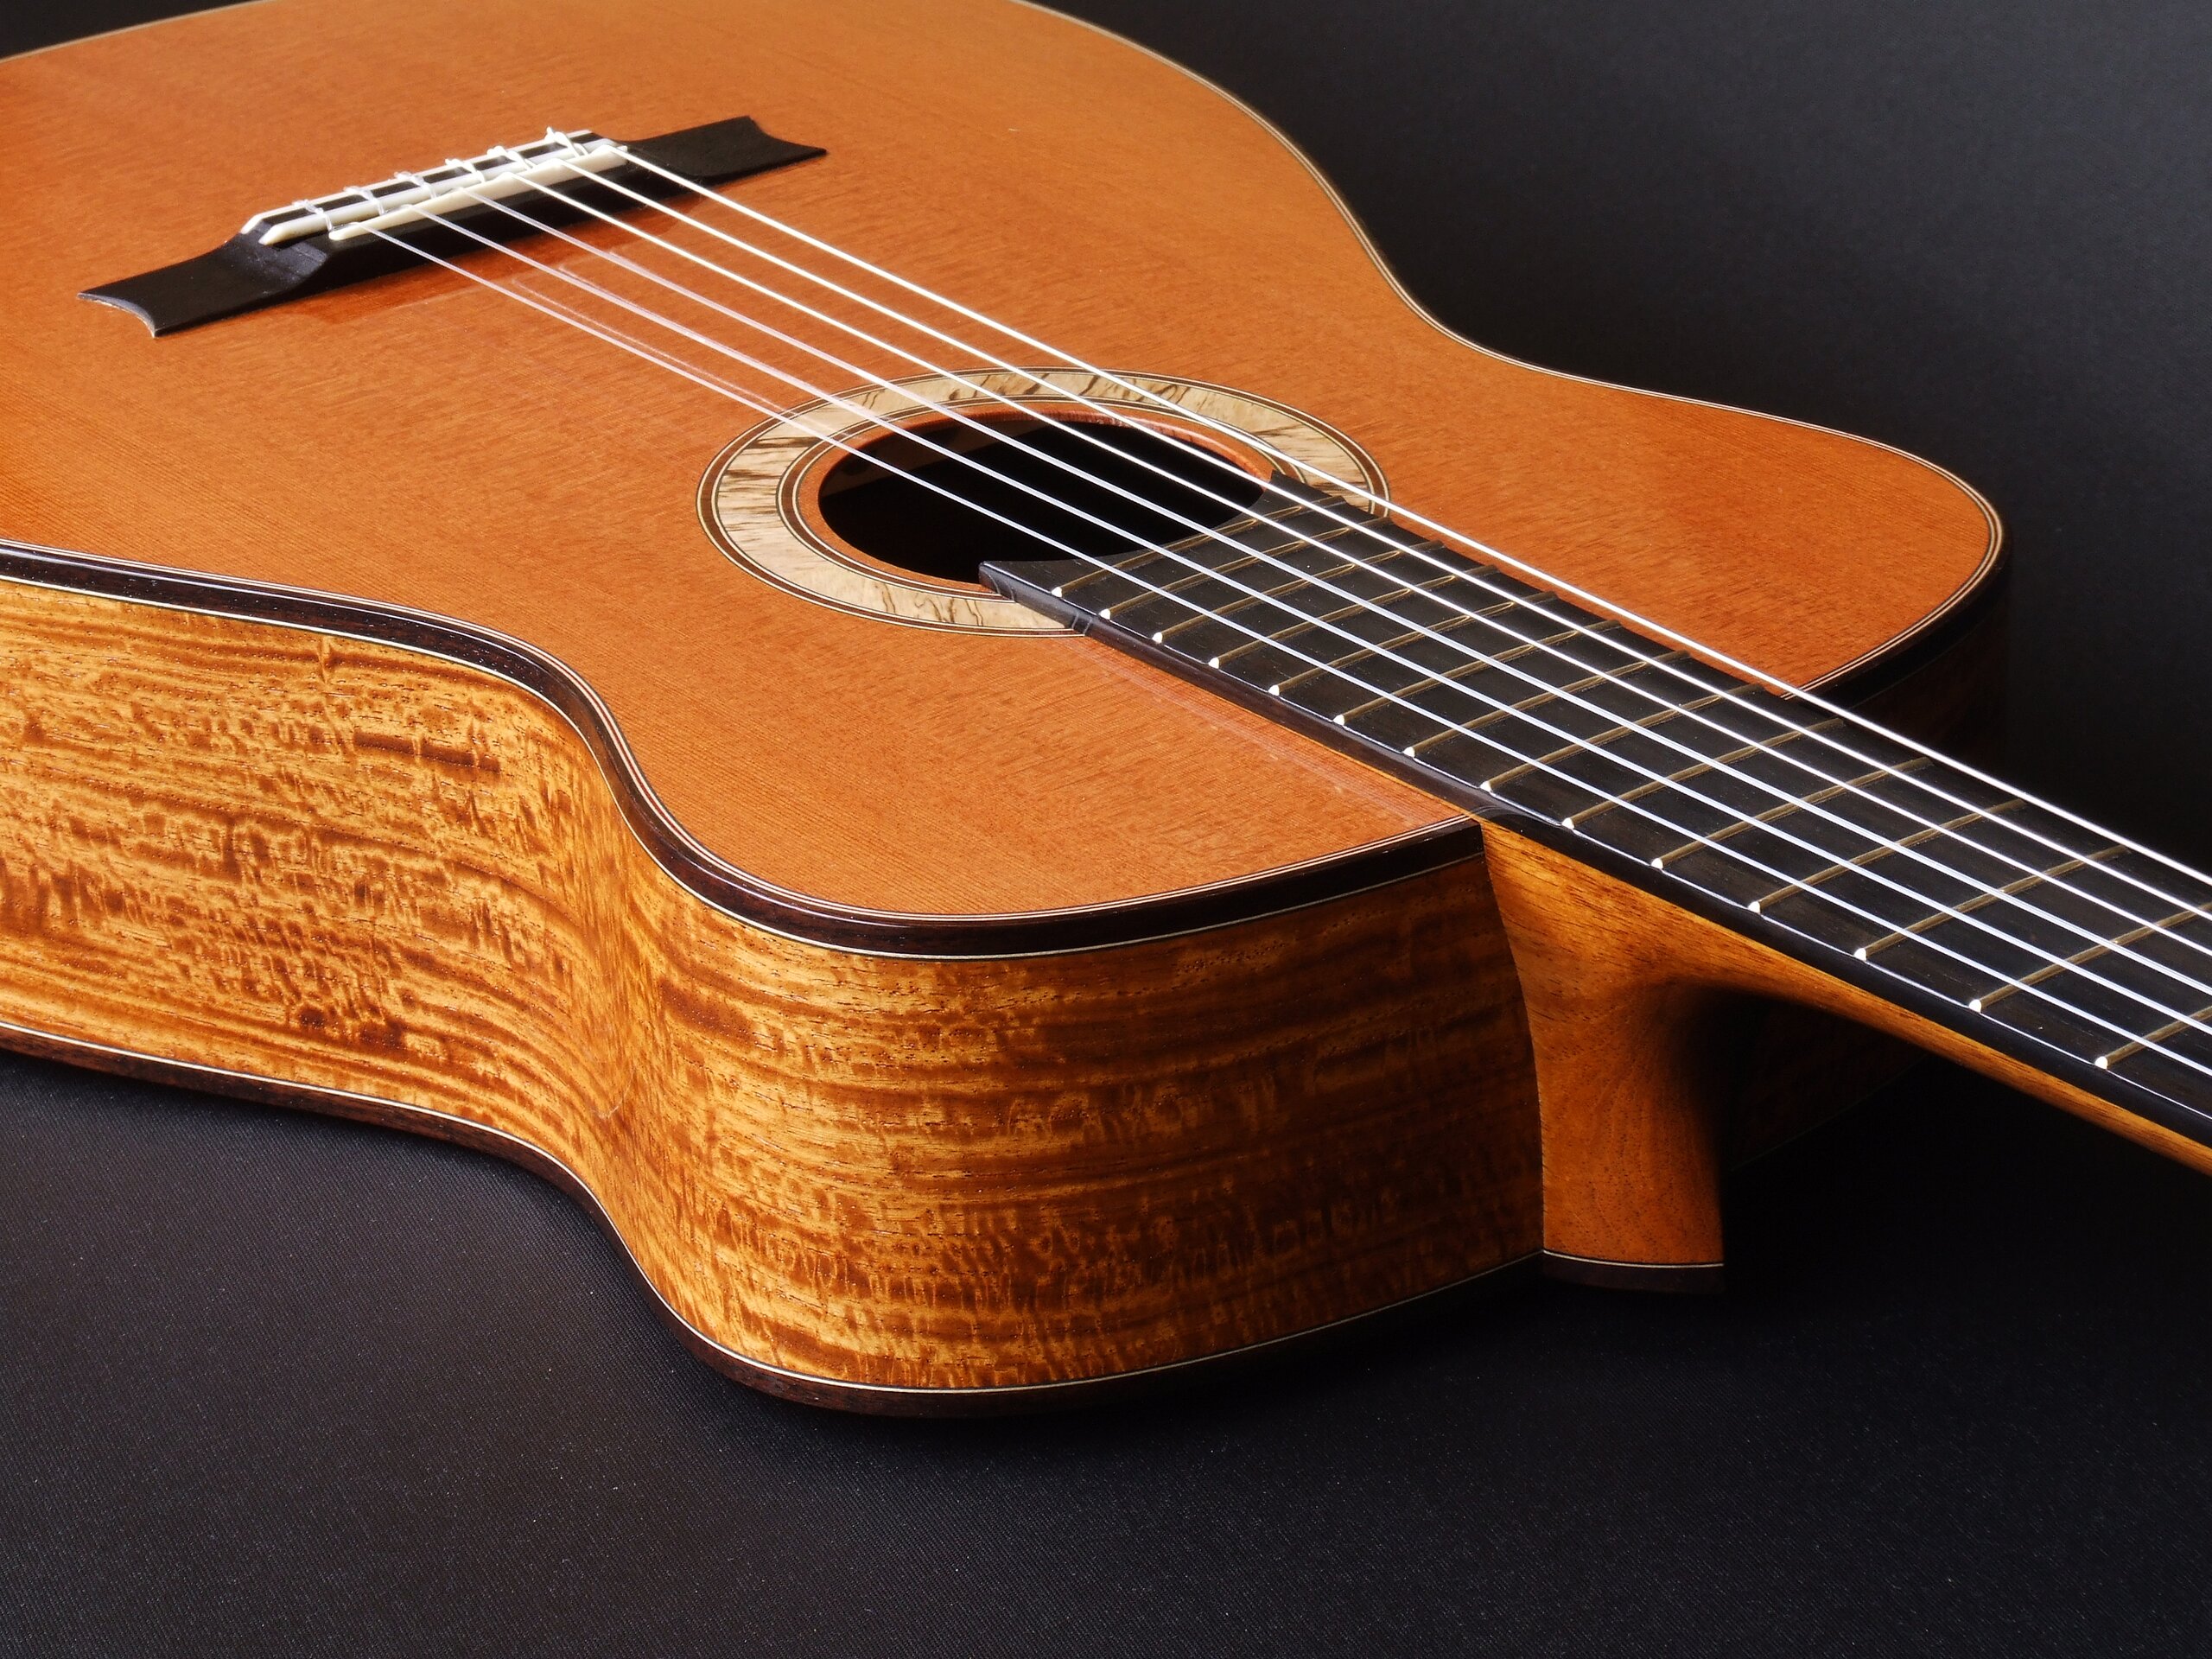 Gore redwood and New Guinea rosewood neo-classical guitar, spalted blackwood rosette